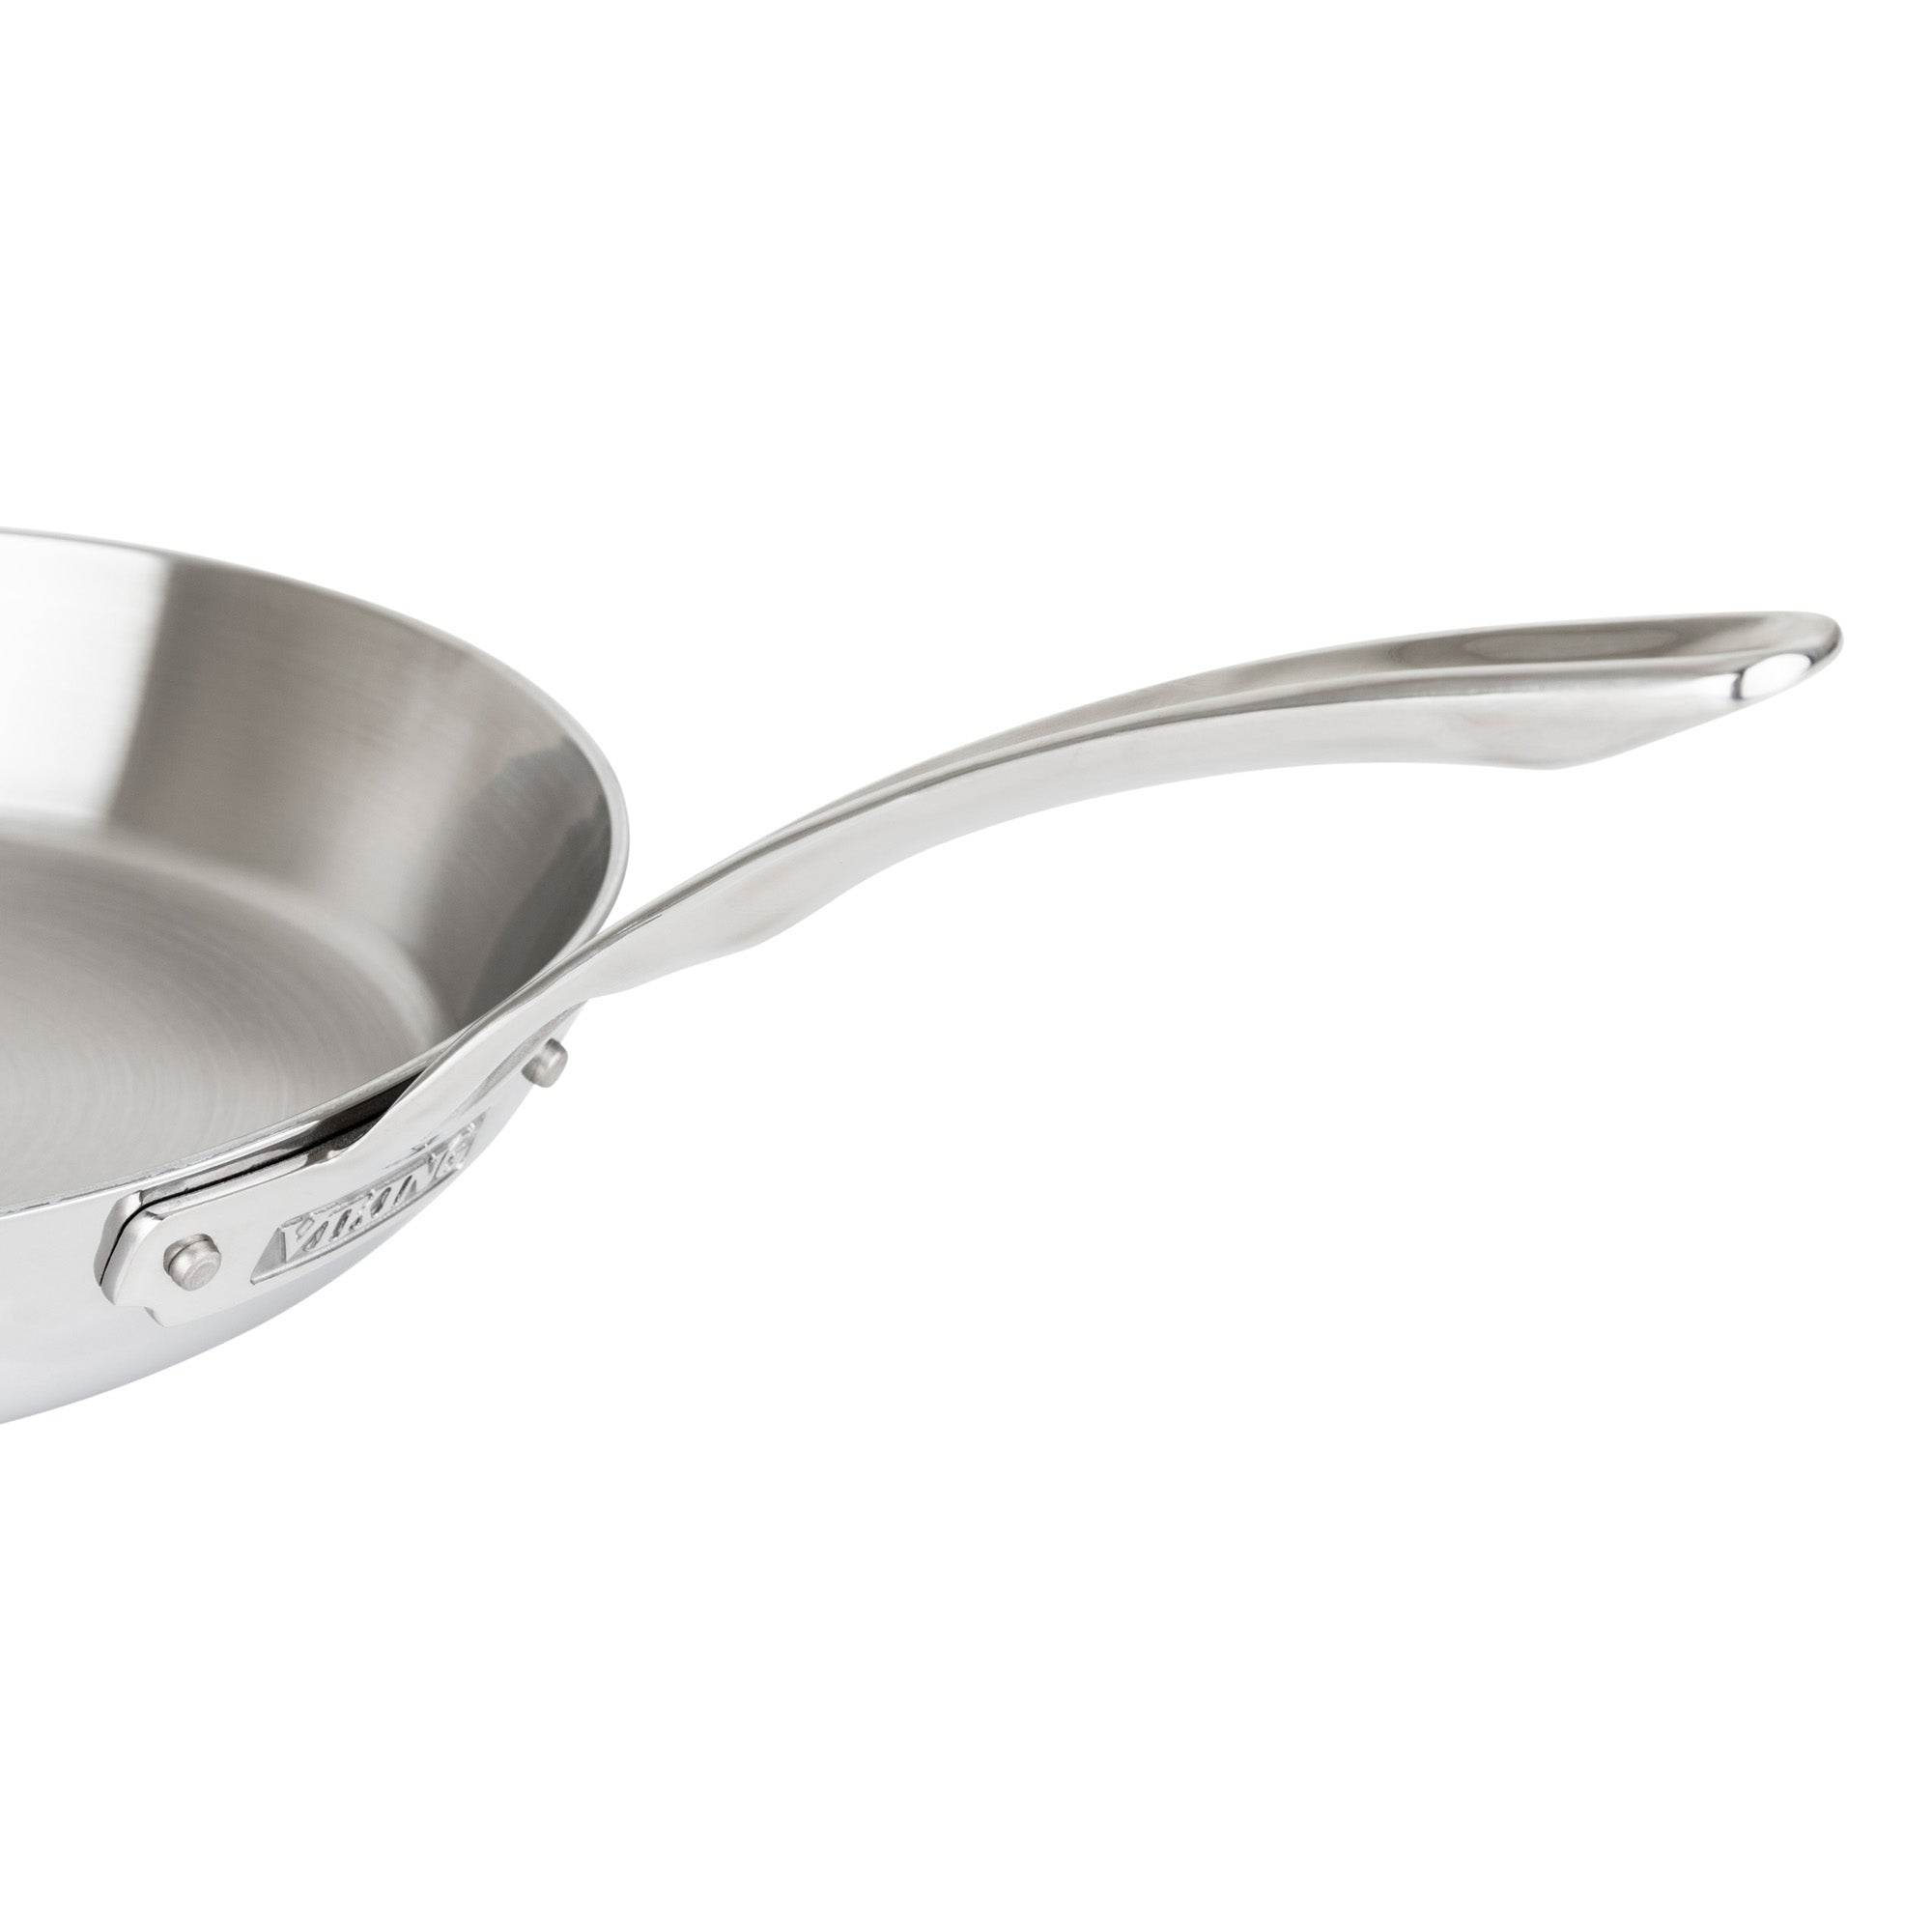 Tri-Ply Stainless Steel 12-Inch Frying Pan - Suitable for All